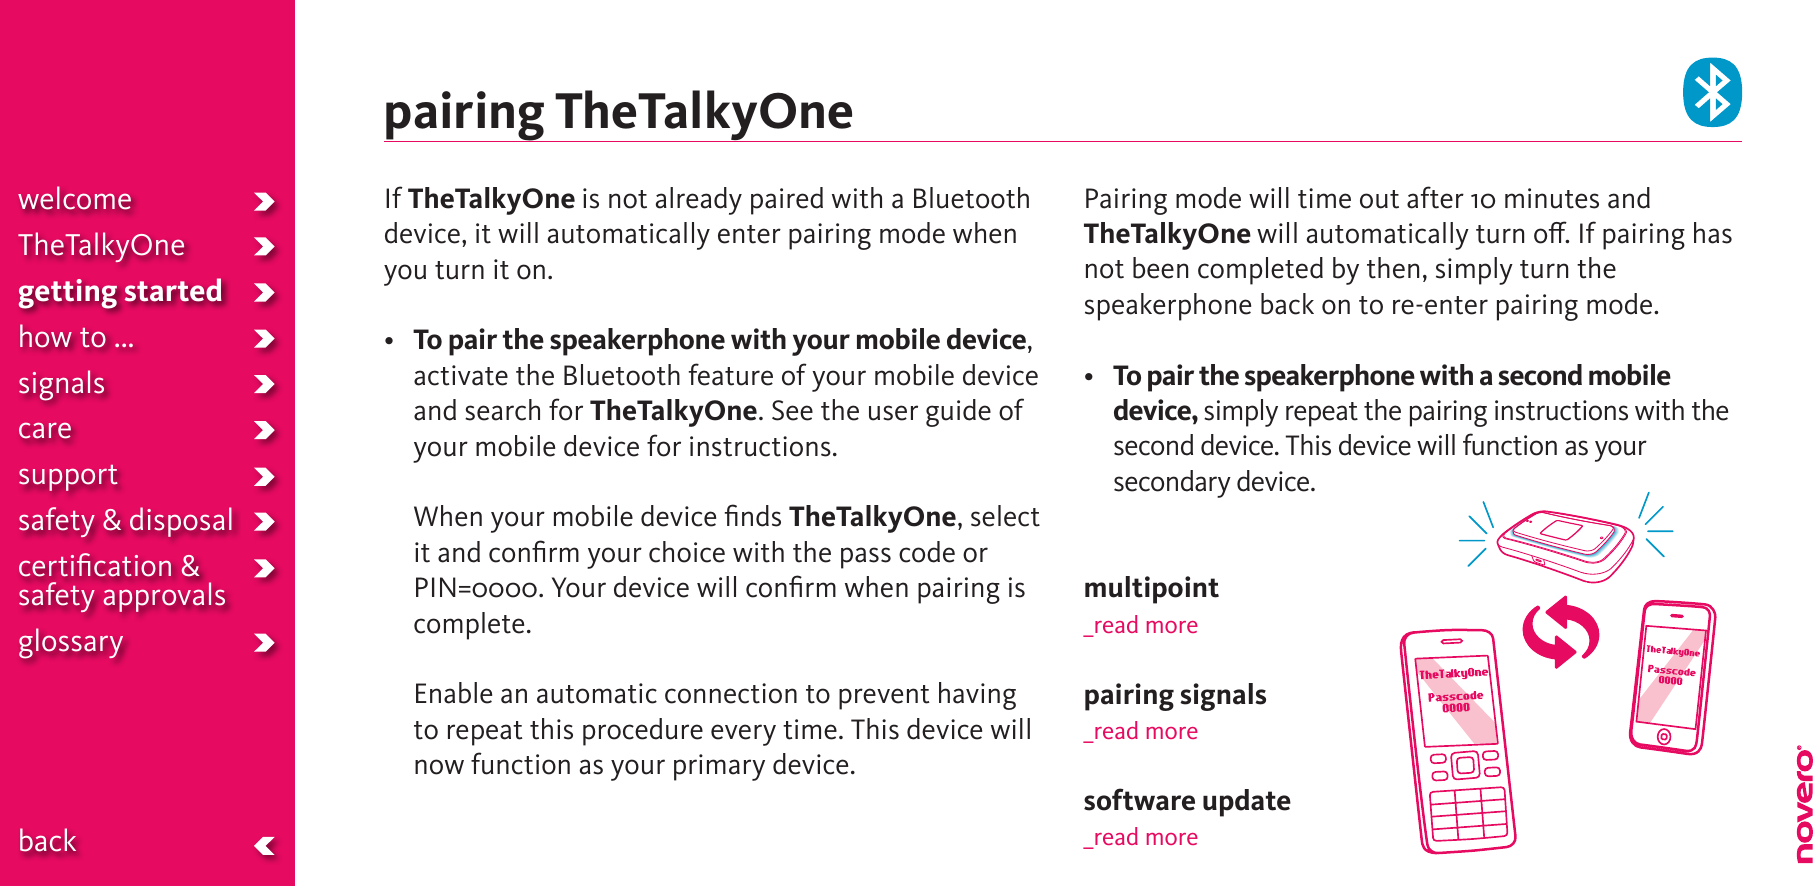 If TheTalkyOne is not already paired with a Bluetooth device, it will automatically enter pairing mode when you turn it on.•   To pair the speakerphone with your mobile device, activate the Bluetooth feature of your mobile device and search for TheTalkyOne. See the user guide of your mobile device for instructions.   When your mobile device ﬁnds TheTalkyOne, select it and conﬁrm your choice with the pass code or PIN=0000. Your device will conﬁrm when pairing is complete.  Enable an automatic connection to prevent having to repeat this procedure every time. This device will now function as your primary device.Pairing mode will time out after 10 minutes and TheTalkyOne will automatically turn o. If pairing has not been completed by then, simply turn the speakerphone back on to re-enter pairing mode. • To pair the speakerphone with a second mobile device, simply repeat the pairing instructions with the second device. This device will function as your secondary device.multipoint_read morepairing signals_read moresoftware update_read morepairing TheTalkyOnewelcomeTheTalkyOnegetting startedhow to ...signalscaresupportsafety &amp; disposalcertiﬁcation &amp;  safety approvals glossary  back